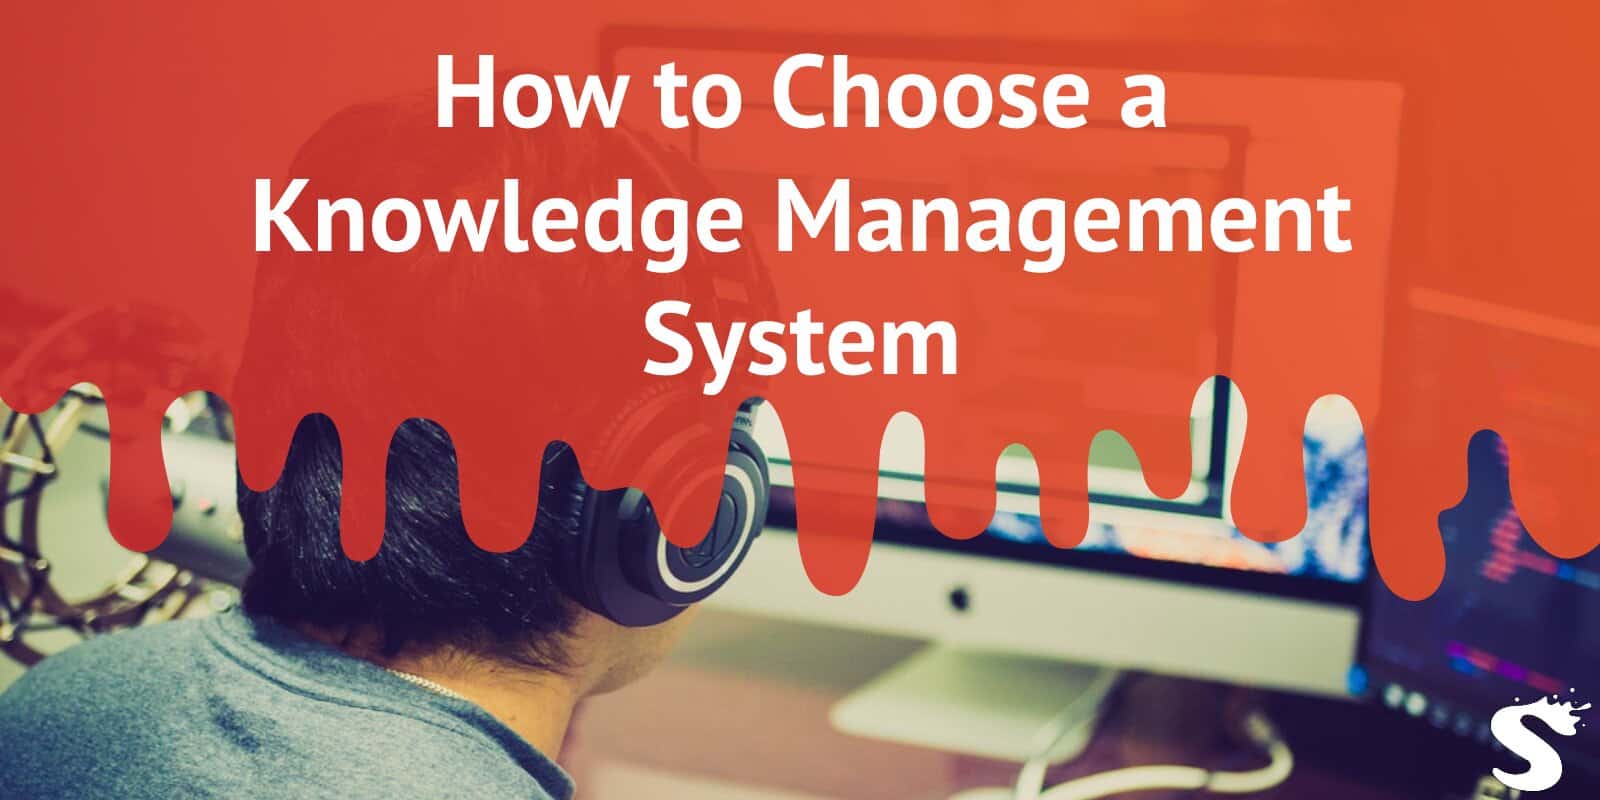 9 Helpful Factors to Consider When Choosing a Knowledge Management System